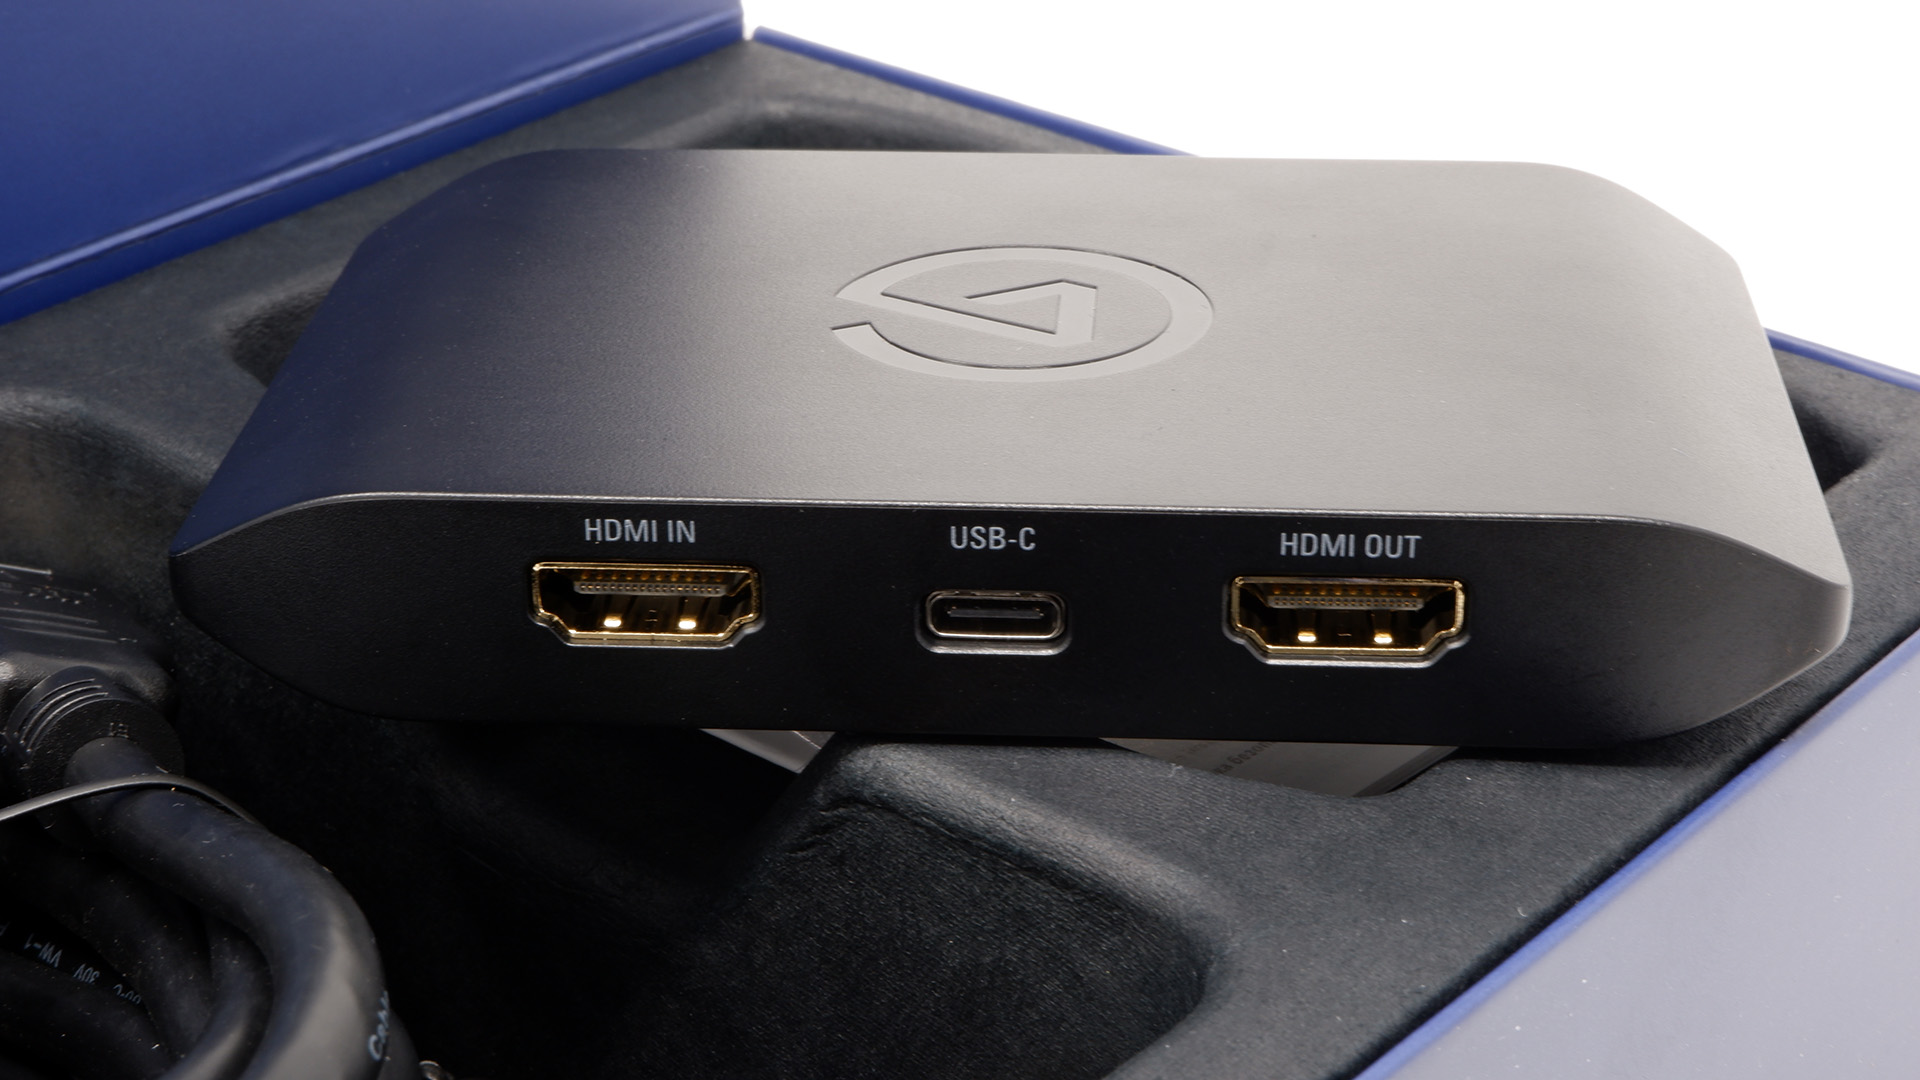 Elgato HD60 X capture card with box and cable